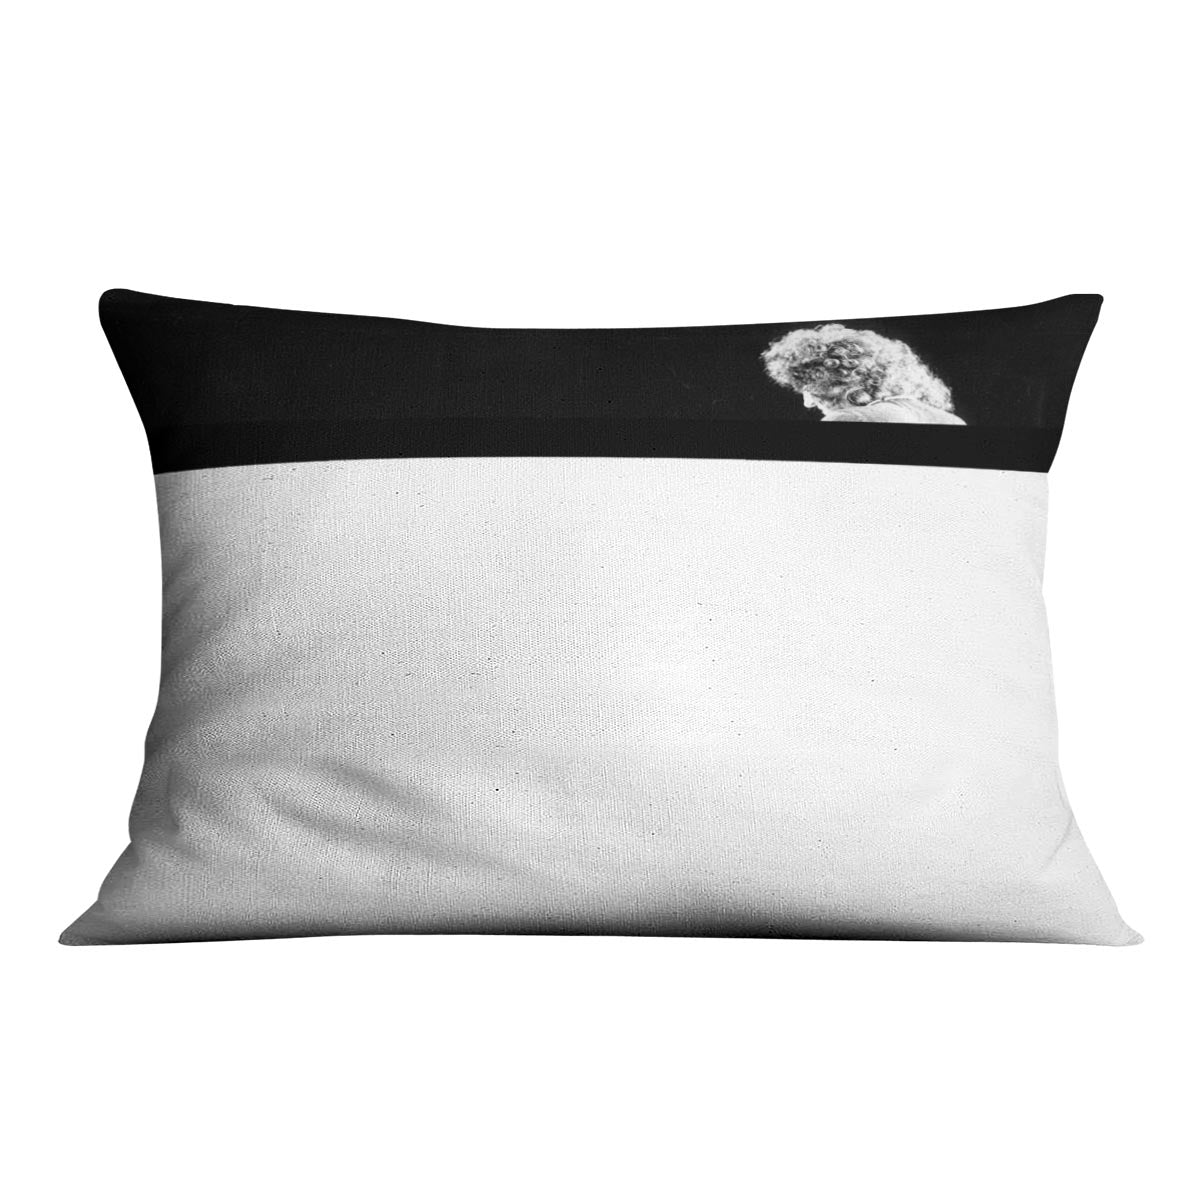 Brian May of Queen Cushion